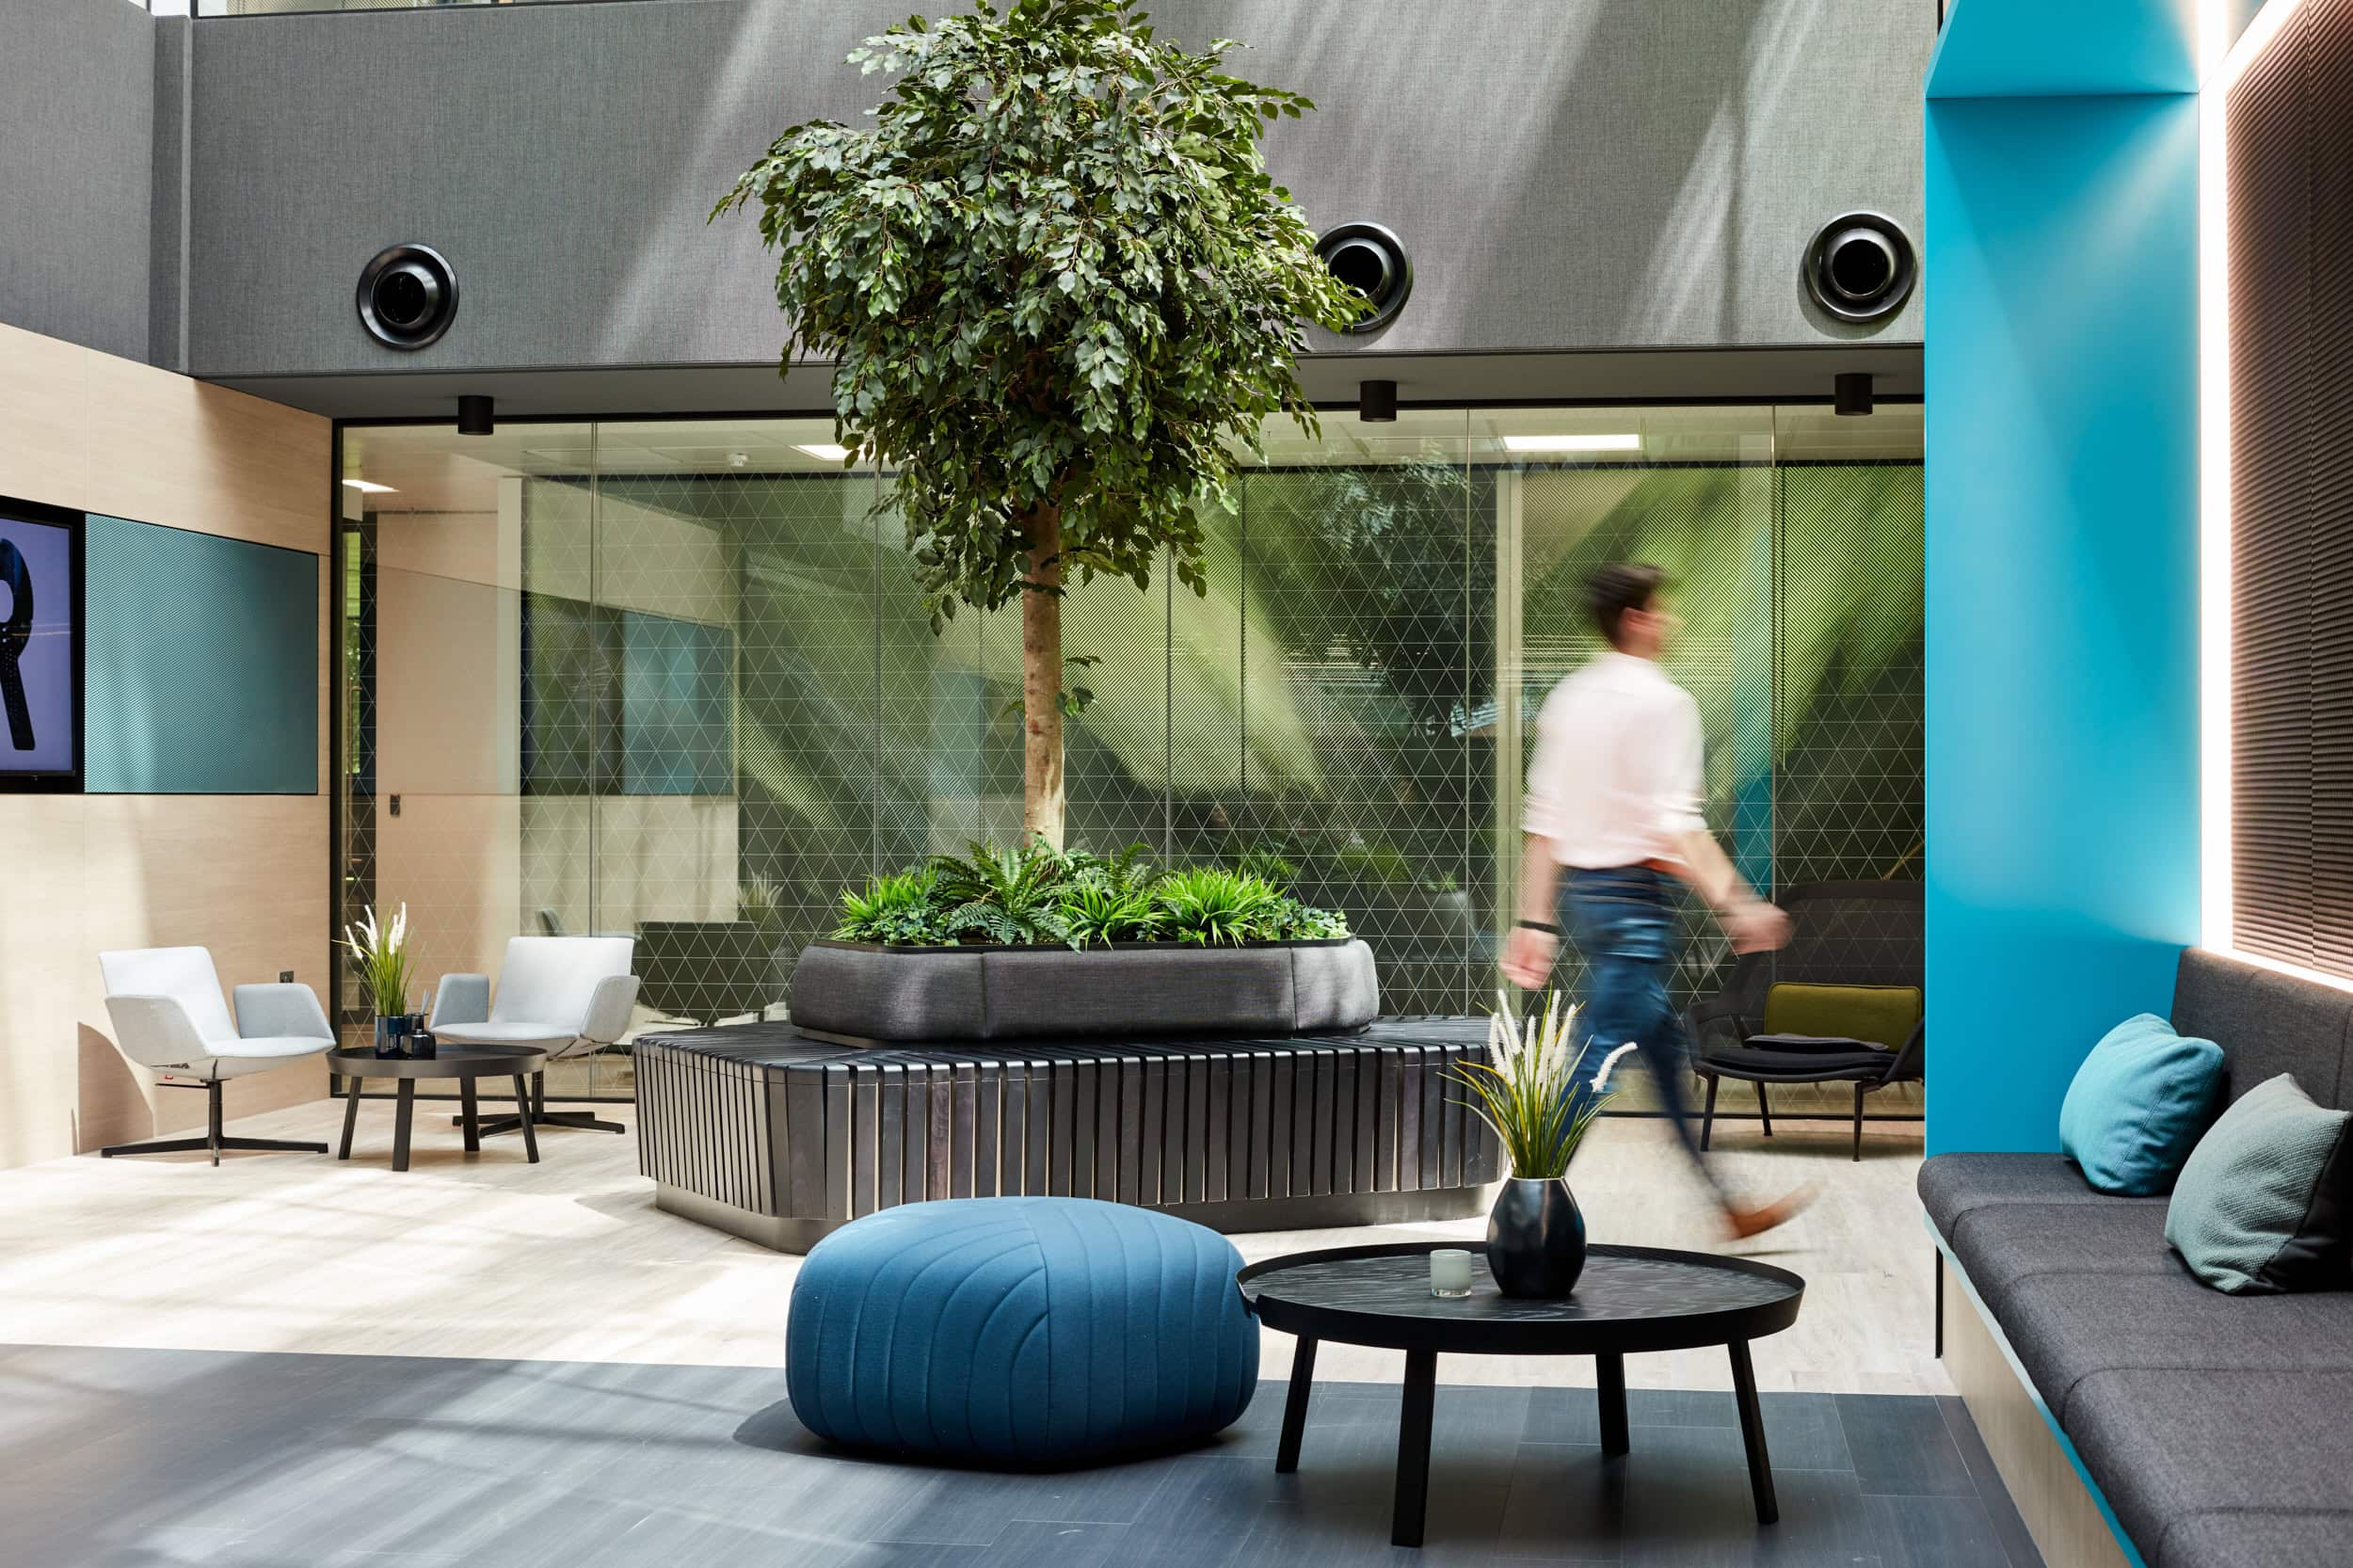 Man walking through sustainable office design with indoor plant in reception space.